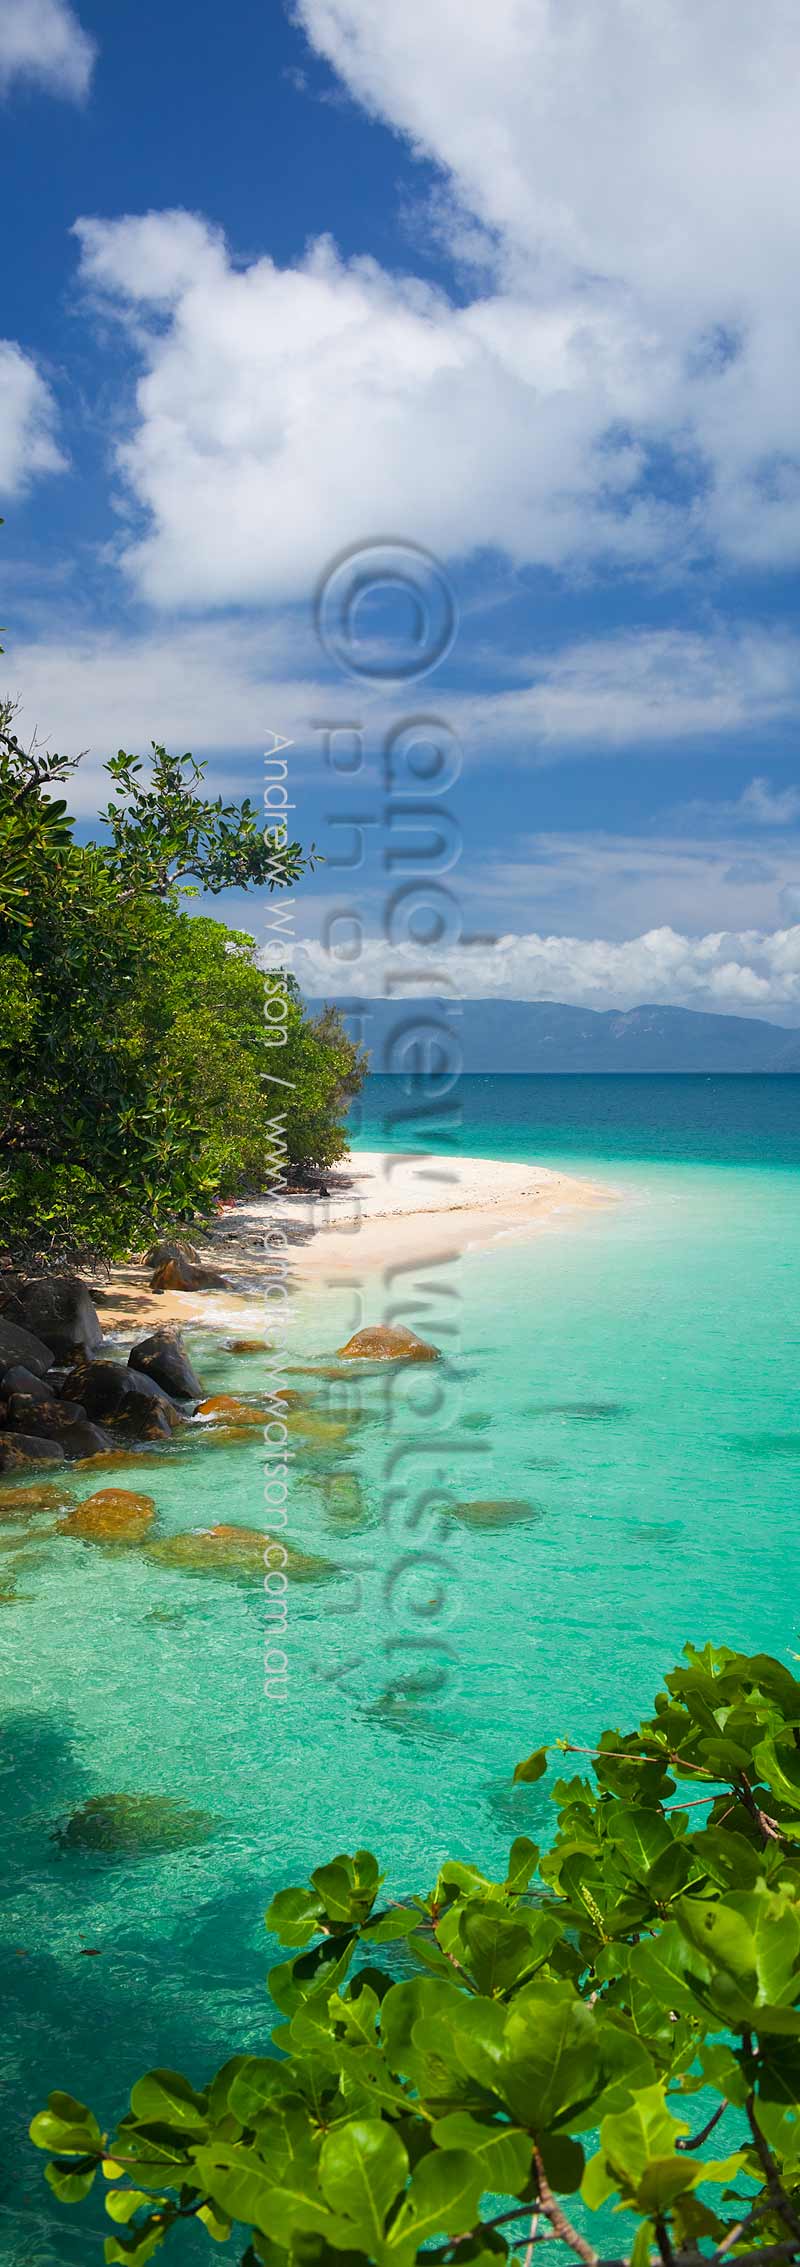 Clear waters of Nudey BeachFitzroy Island, Cairns, North QueenslandImage available for licensing or as a fine-art print... please enquire